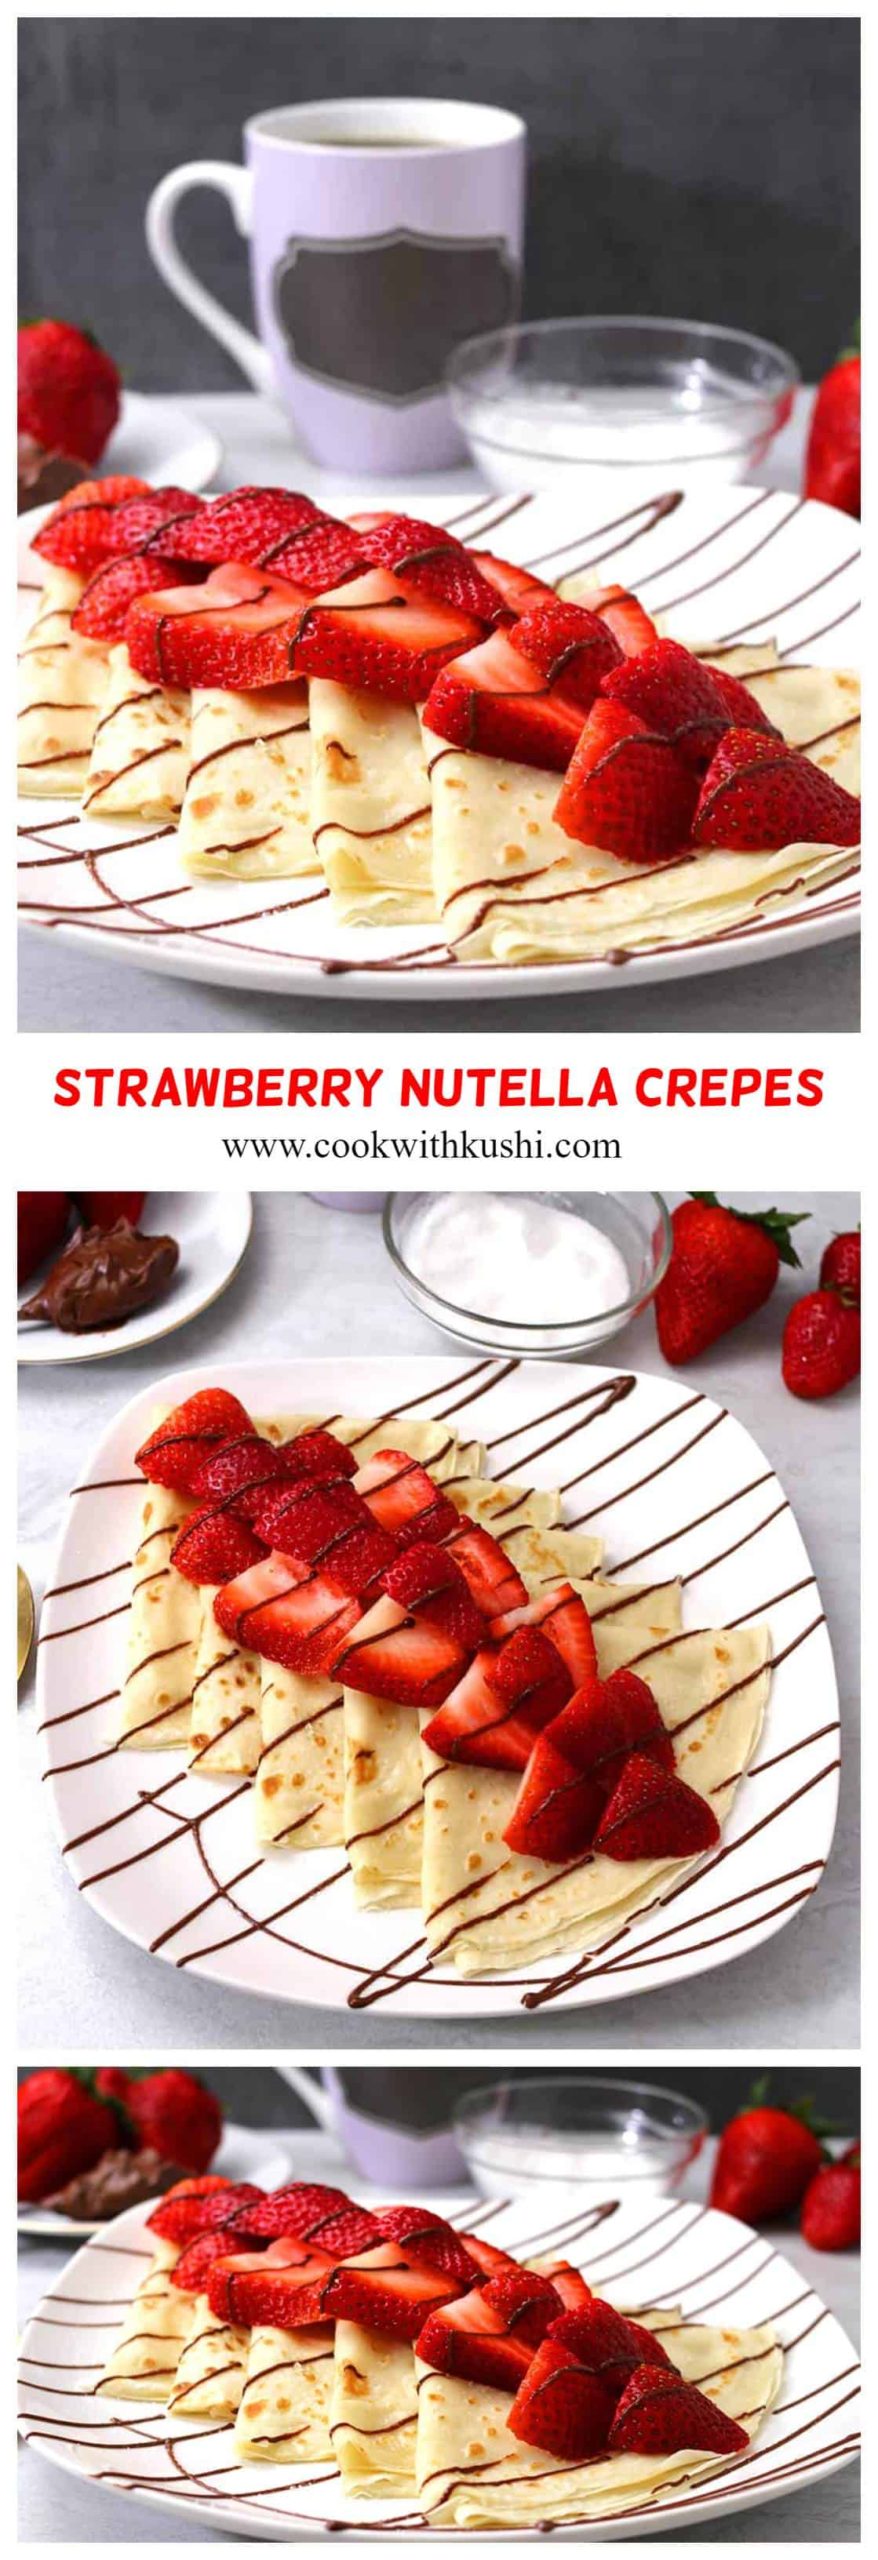 Strawberry Nutella Crepes are light, fresh and delicious, a type of very thin pancake that are prepared using very basic ingredients from your kitchen. These are perfect as a fancy breakfast or even as a dessert. #crepes #strawberries #Nutella #homemade #bestandeasy #breakfastrecipes #savory #sweet #fancydessert #breakfastcrepes #crapesrecipes #crepesfilling